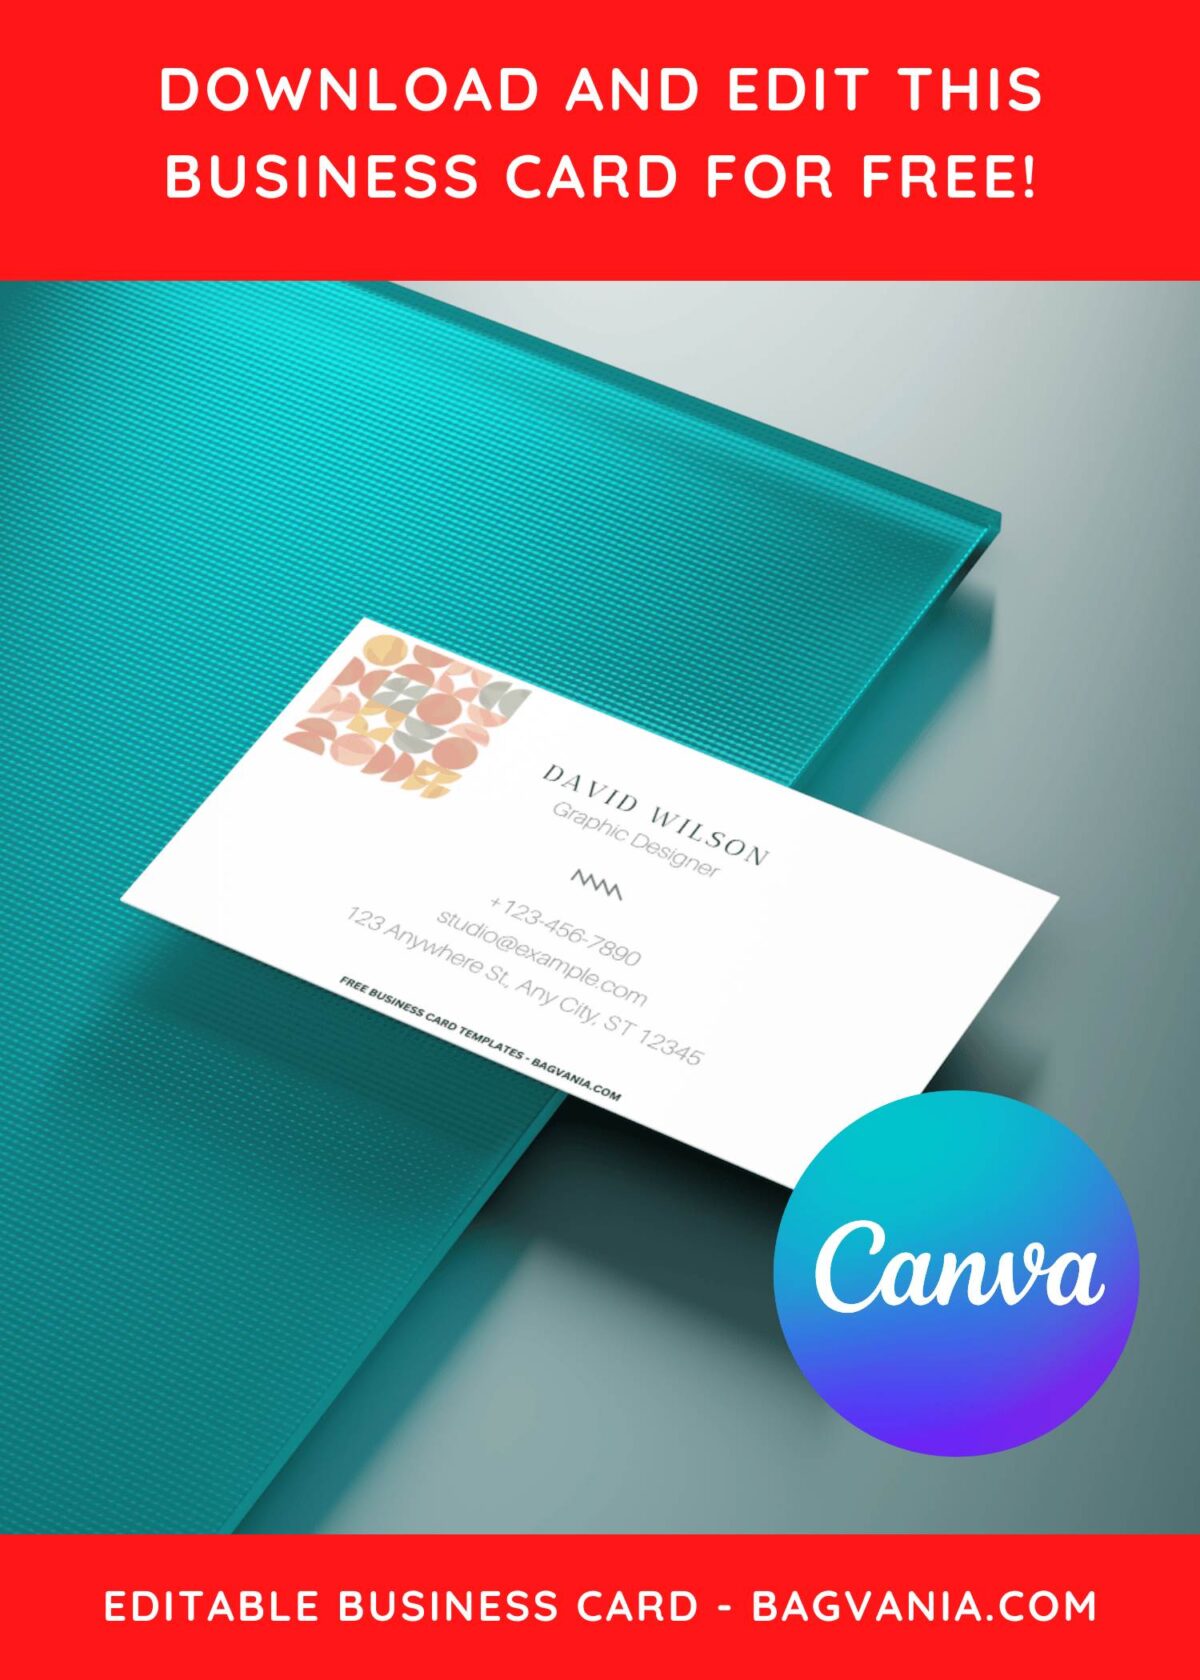 10+ Edgy Canva Business Card Templates D